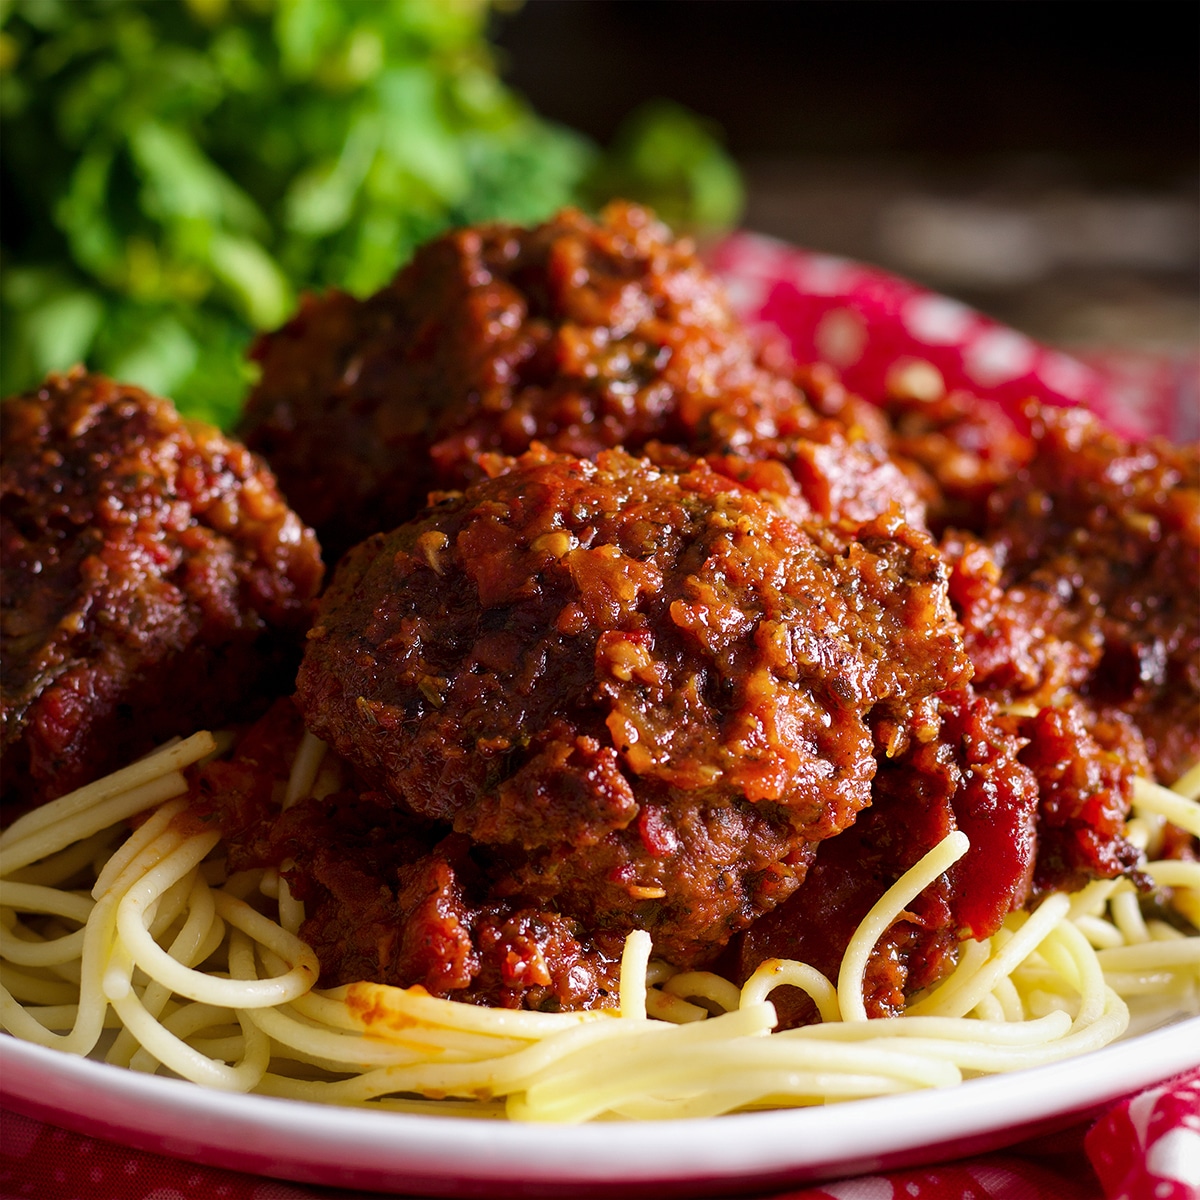 A plate piled high with spaghetti noodles topped with Italian meatballs baked in marinara.